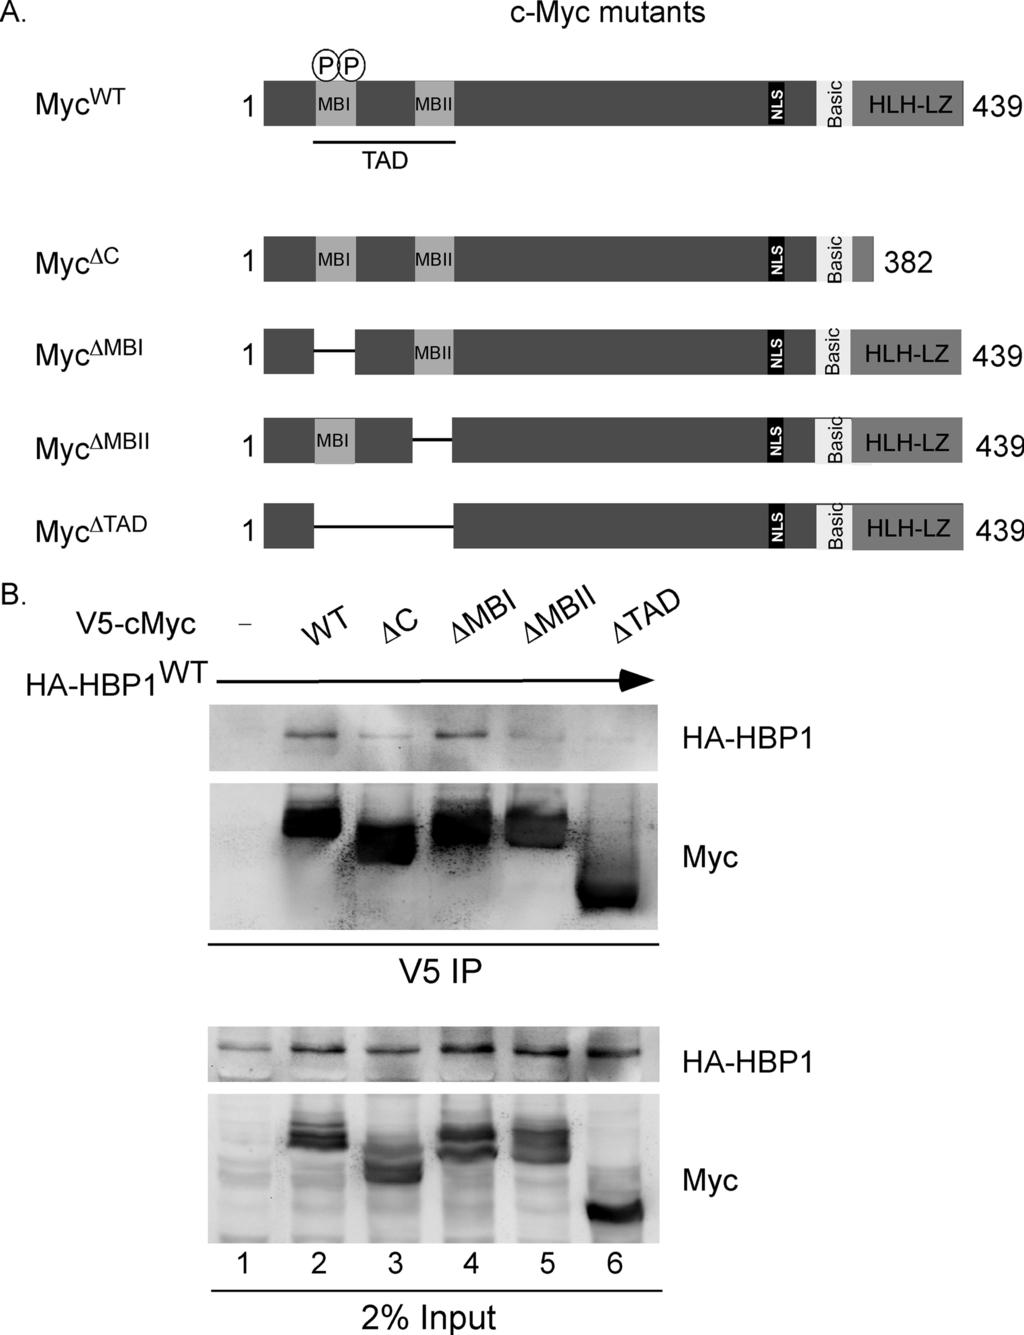 FIGURE 4. Multiple c-myc domains are required for binding to HBP1. A, a schematic of full-length c-myc and c-myc deletion mutants is shown. c-myc functional domains are indicated.